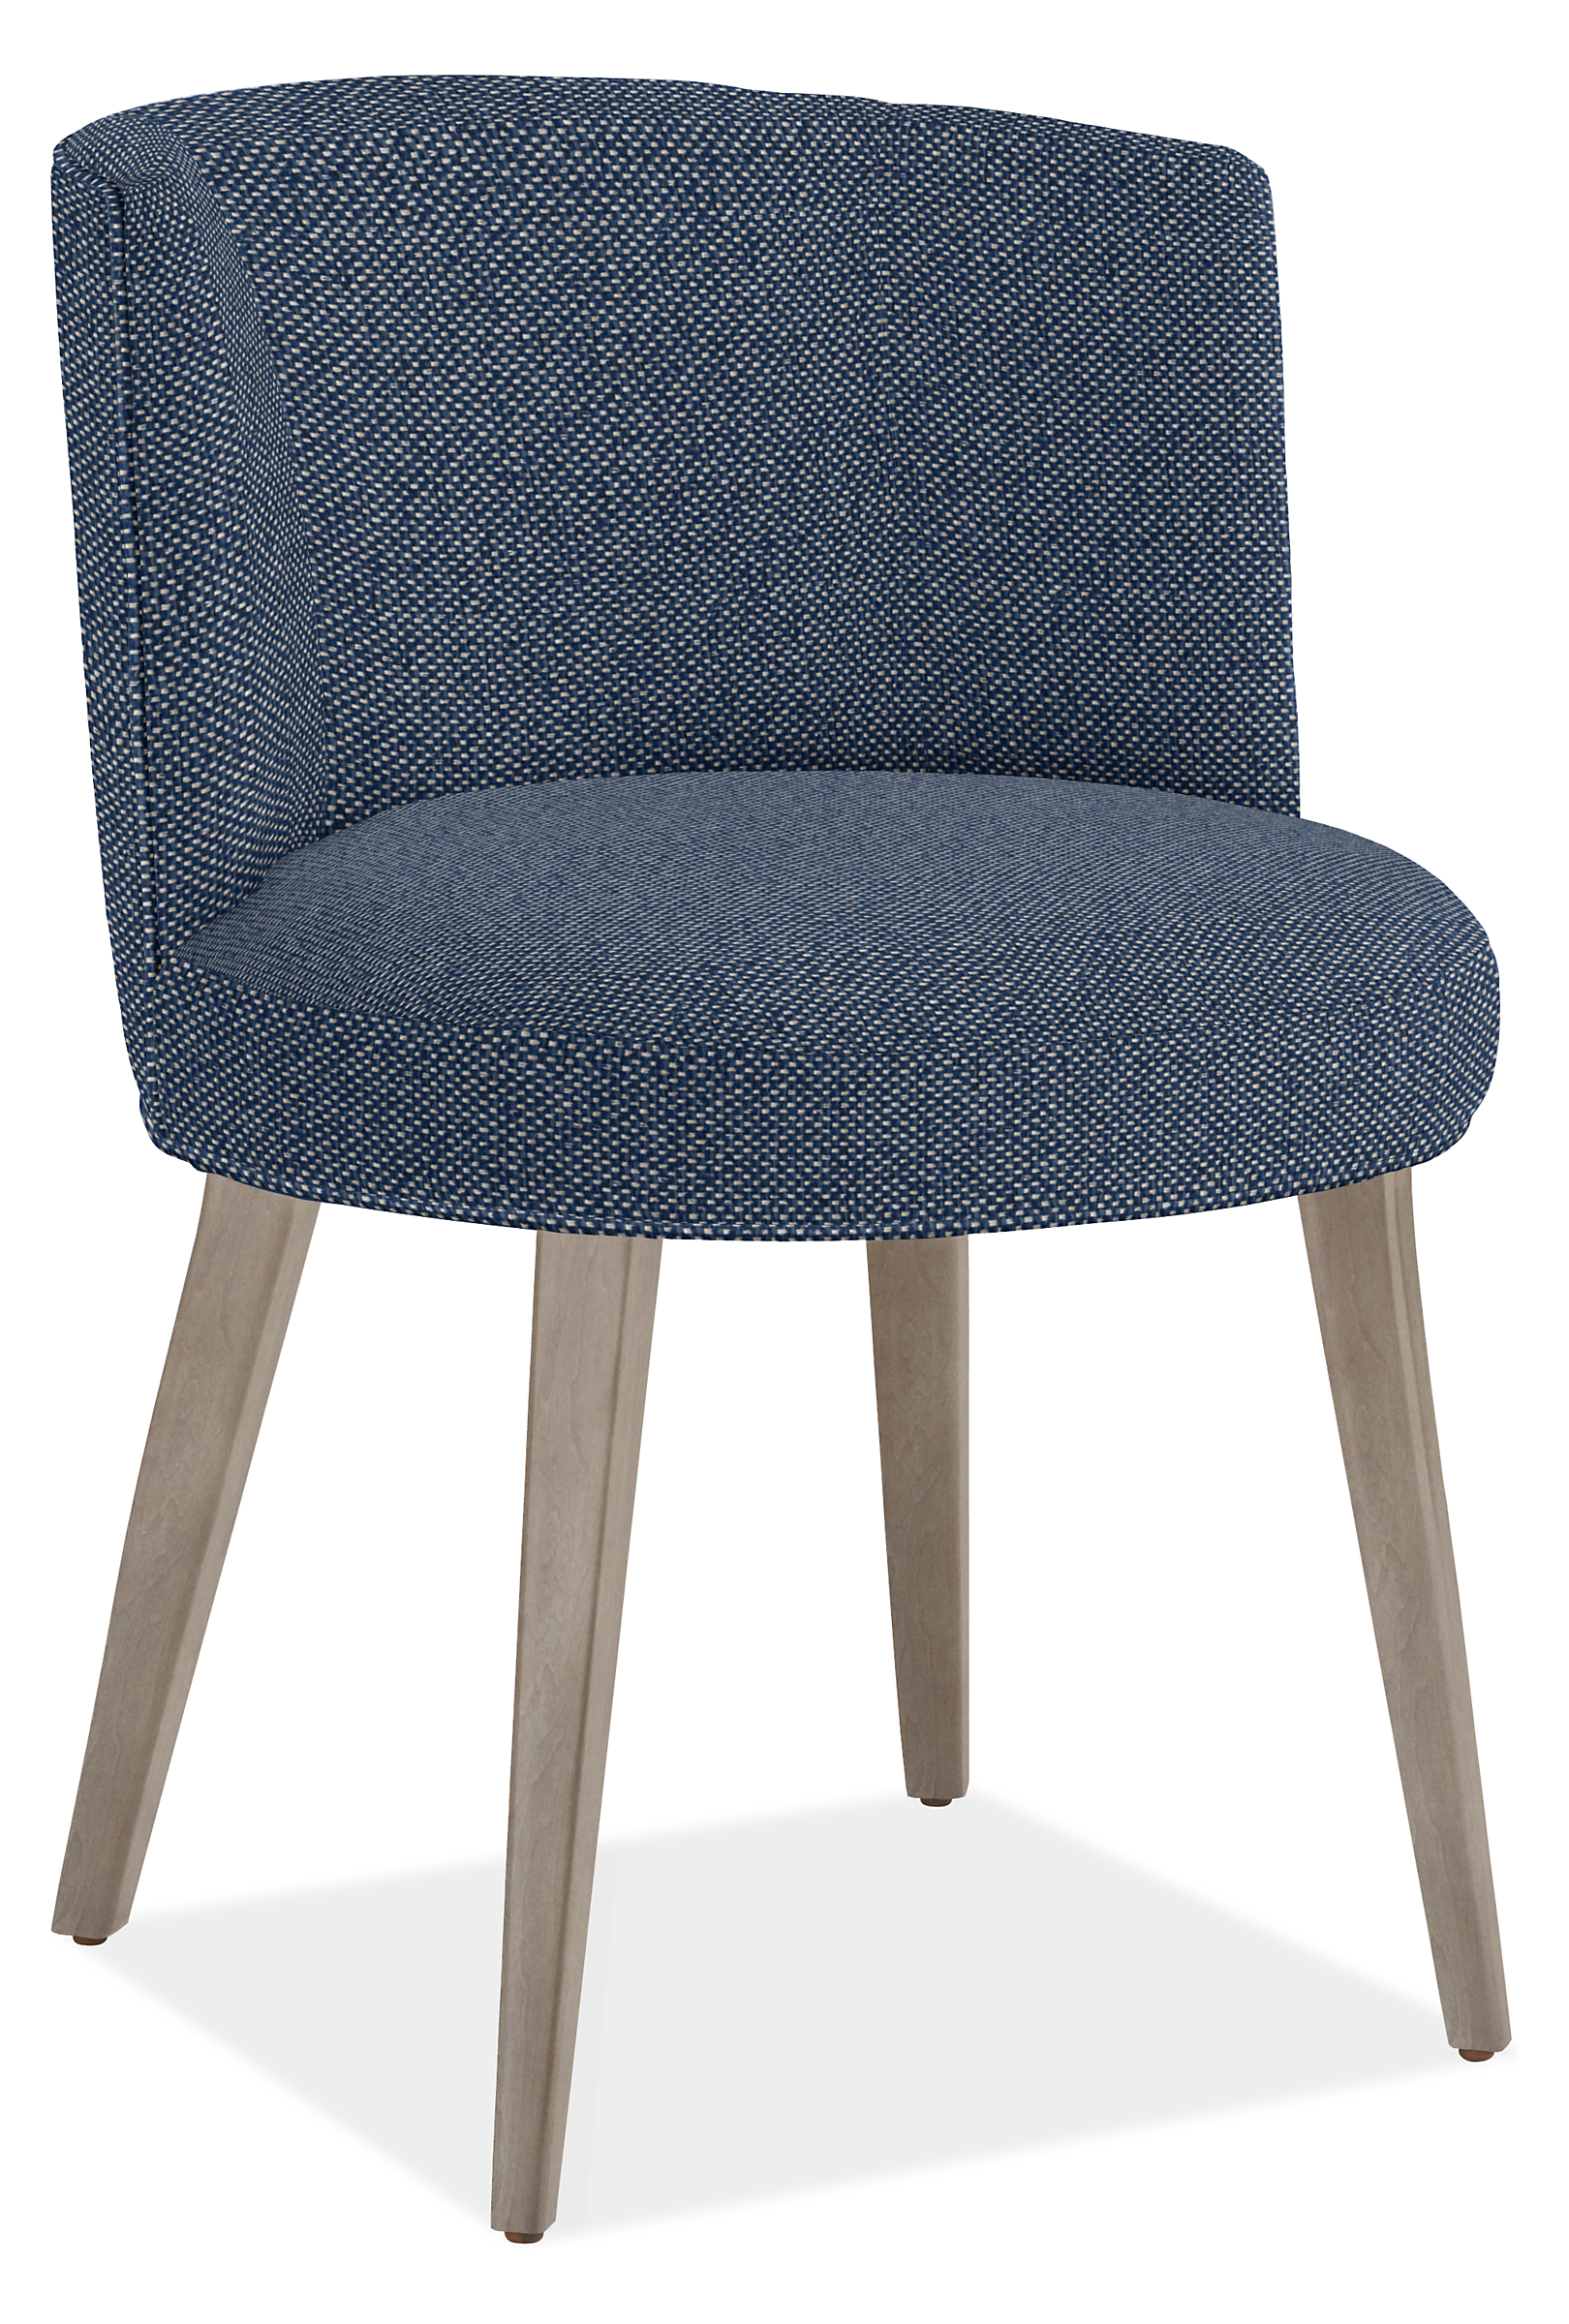 June Side Chair in Arin Navy with Shell Legs